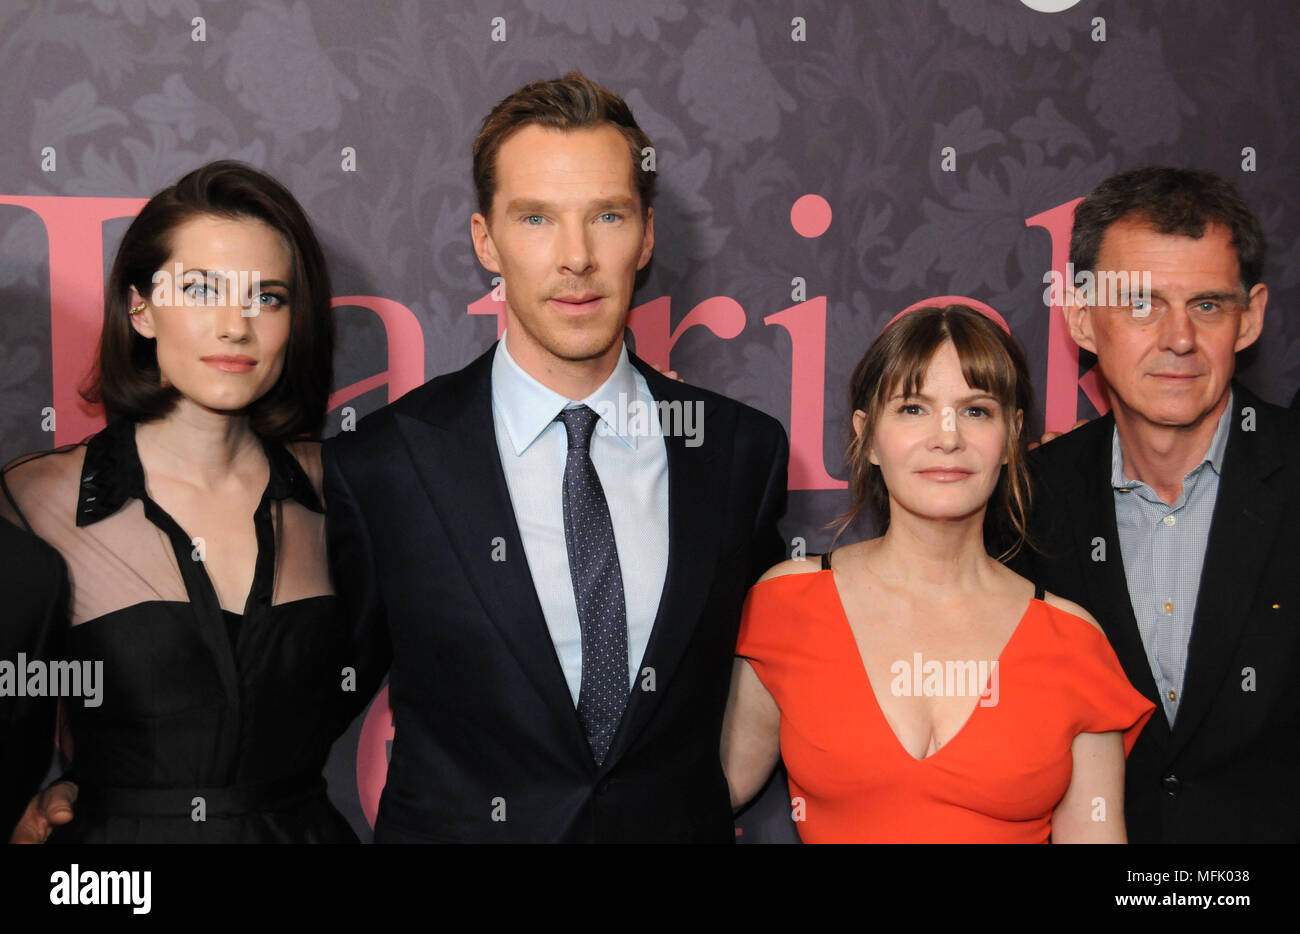 LOS ANGELES, CA - APRIL 25:  (L-R) Actress Allison Williams, actor Benedict Cumberbatch, actress Jennifer Jason Leigh and executive producer Michael Jackson attend the Premiere of Showtime's 'Patrick Melrose' at the Linwood Dunn Theater on April 25, 2018 in Los Angeles, California. Photo by Barry King/Alamy Live News Stock Photo